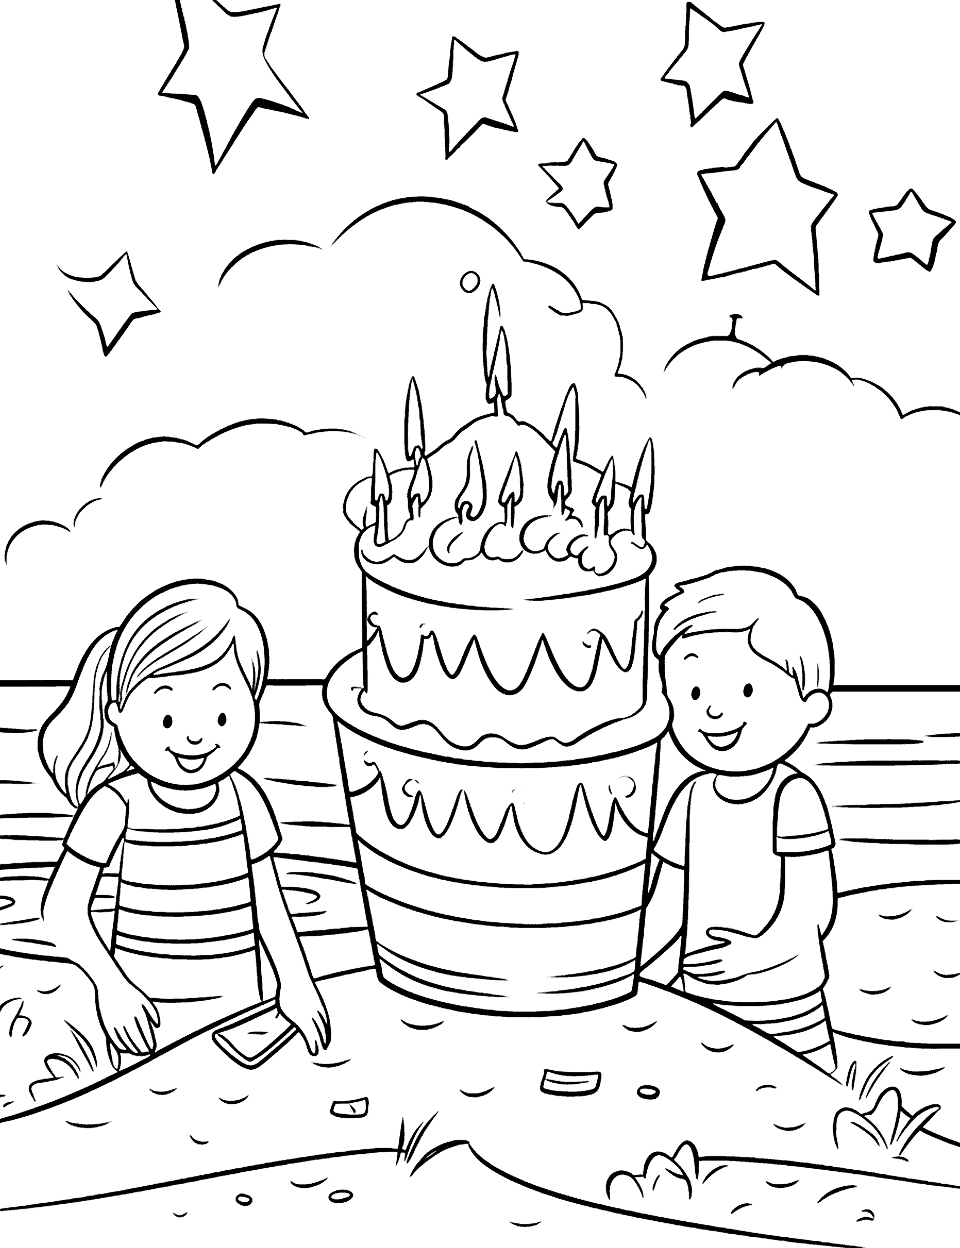 Sandcastle Birthday Happy Coloring Page - Kids building a gigantic sandcastle cake at the beach.